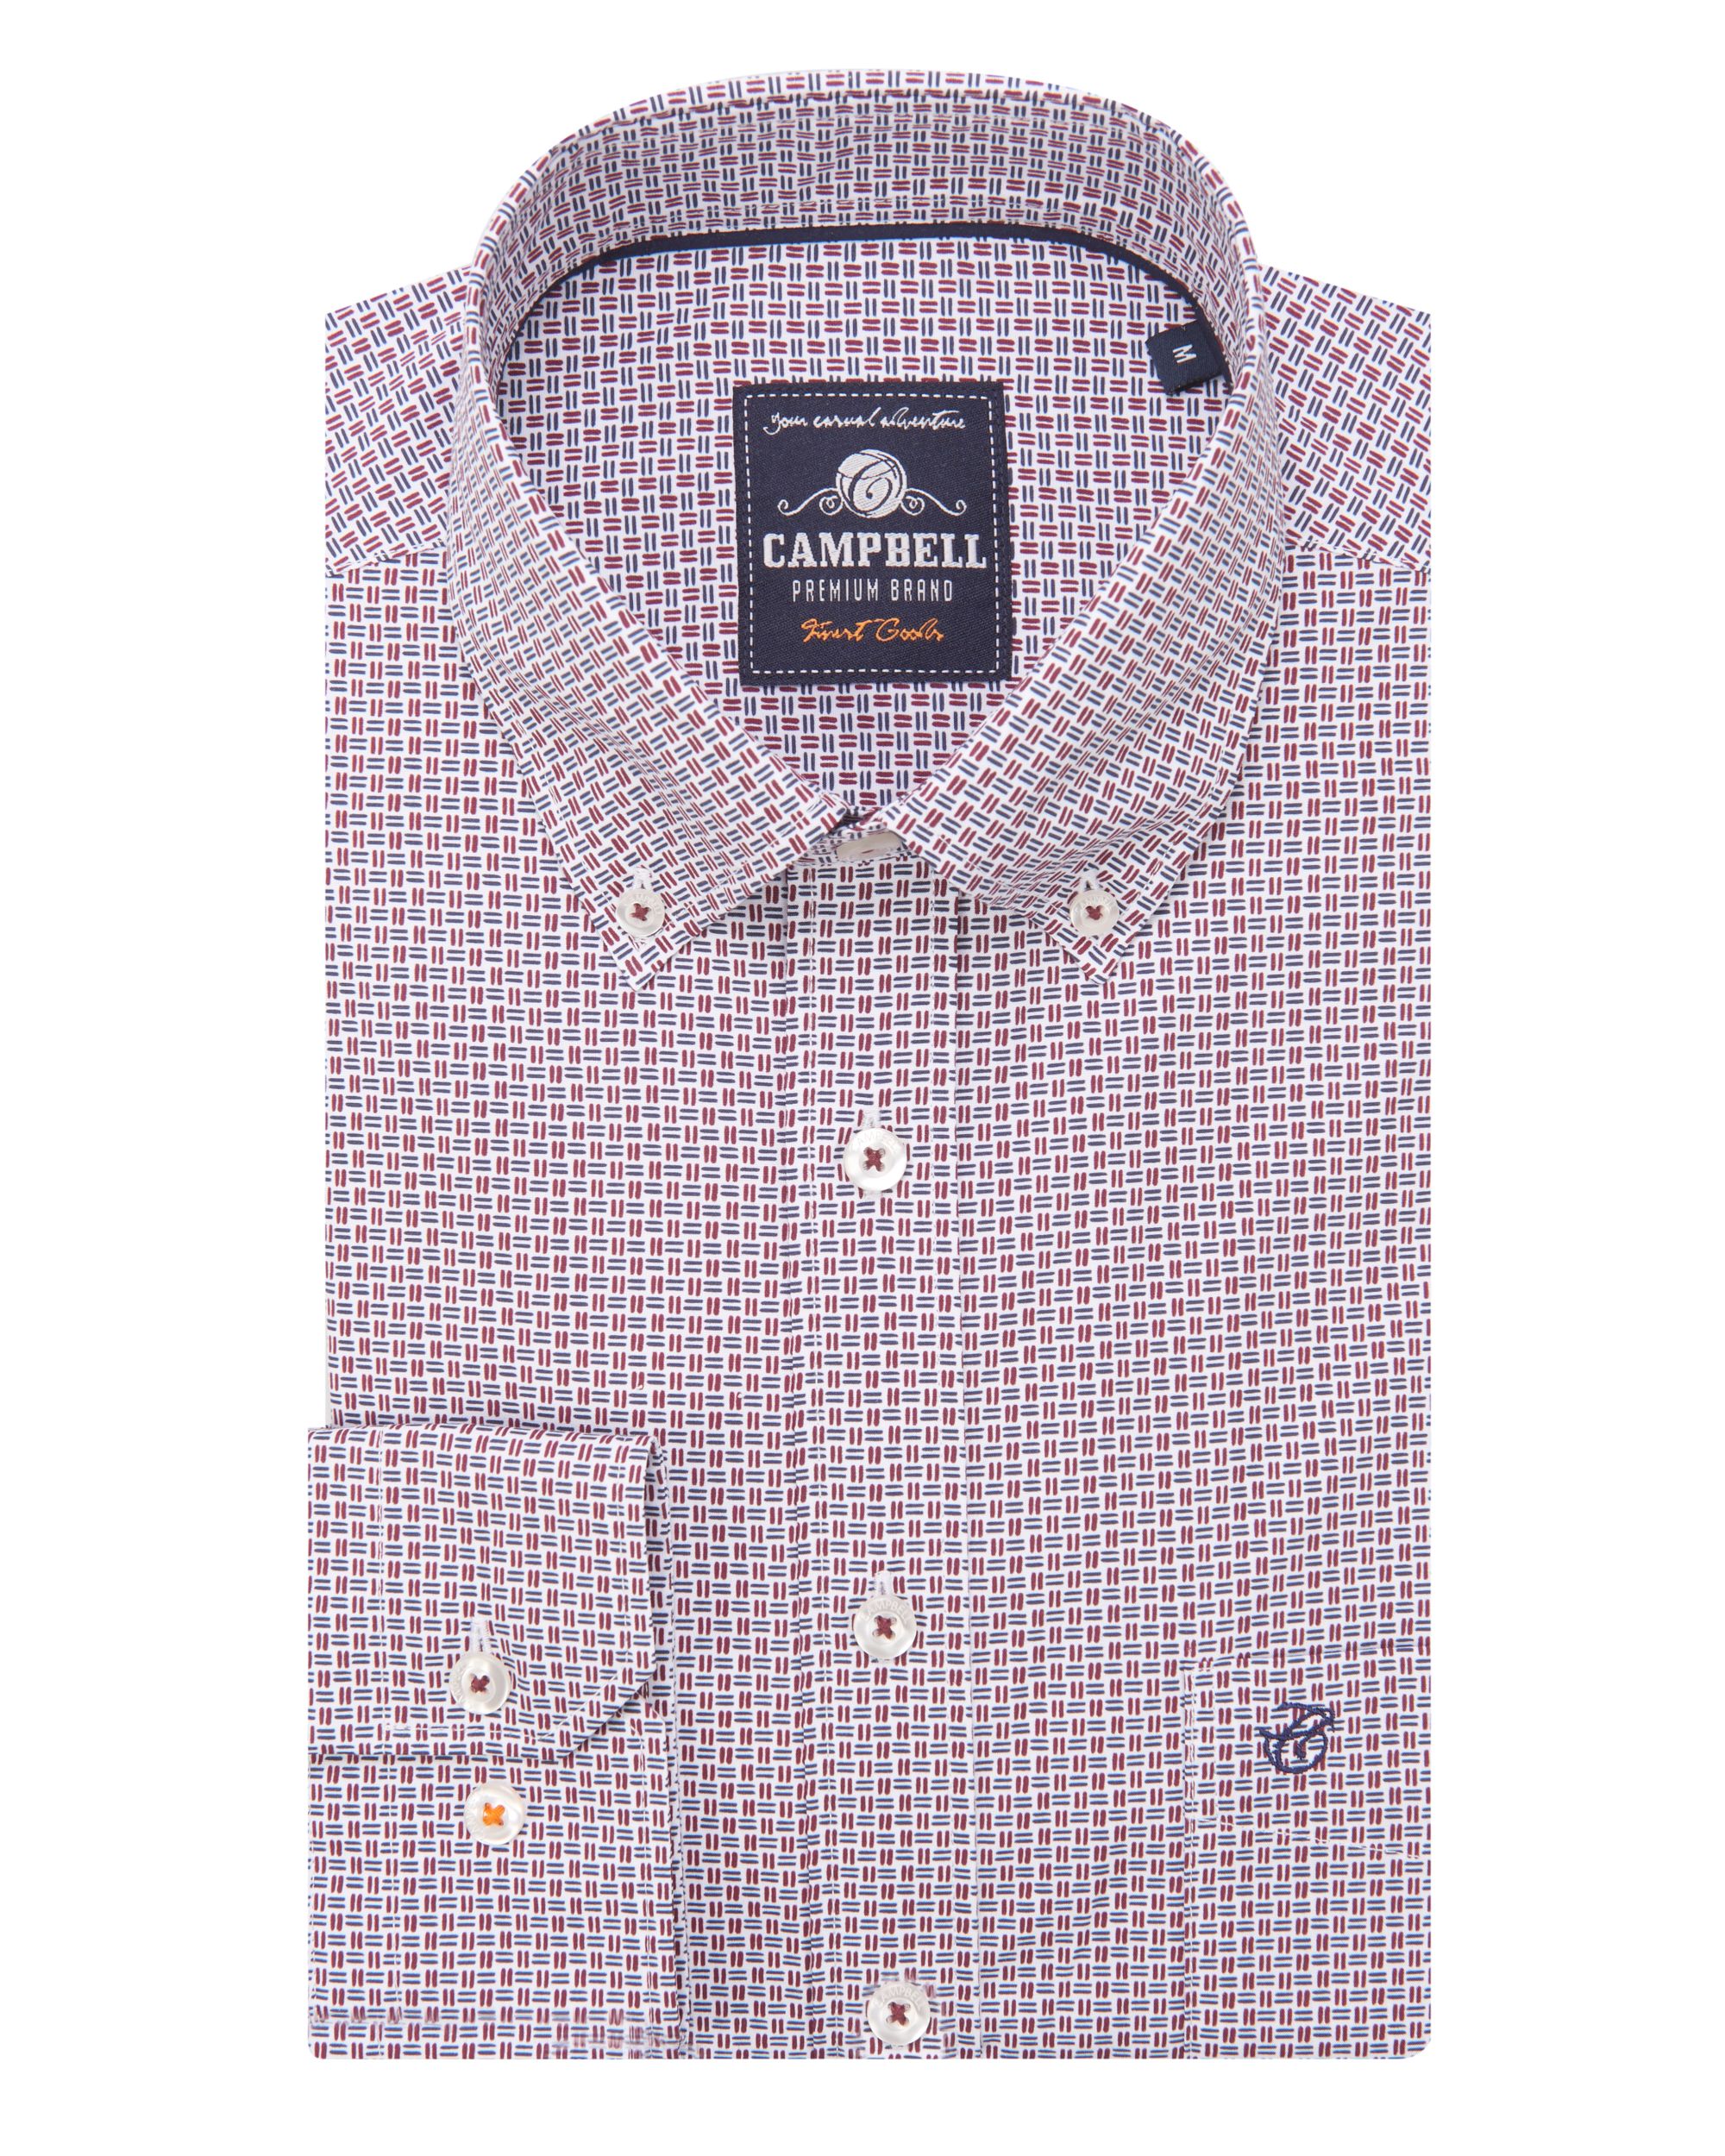 Campbell Classic Casual Overhemd LM Bordeaux dessin 084660-002-L